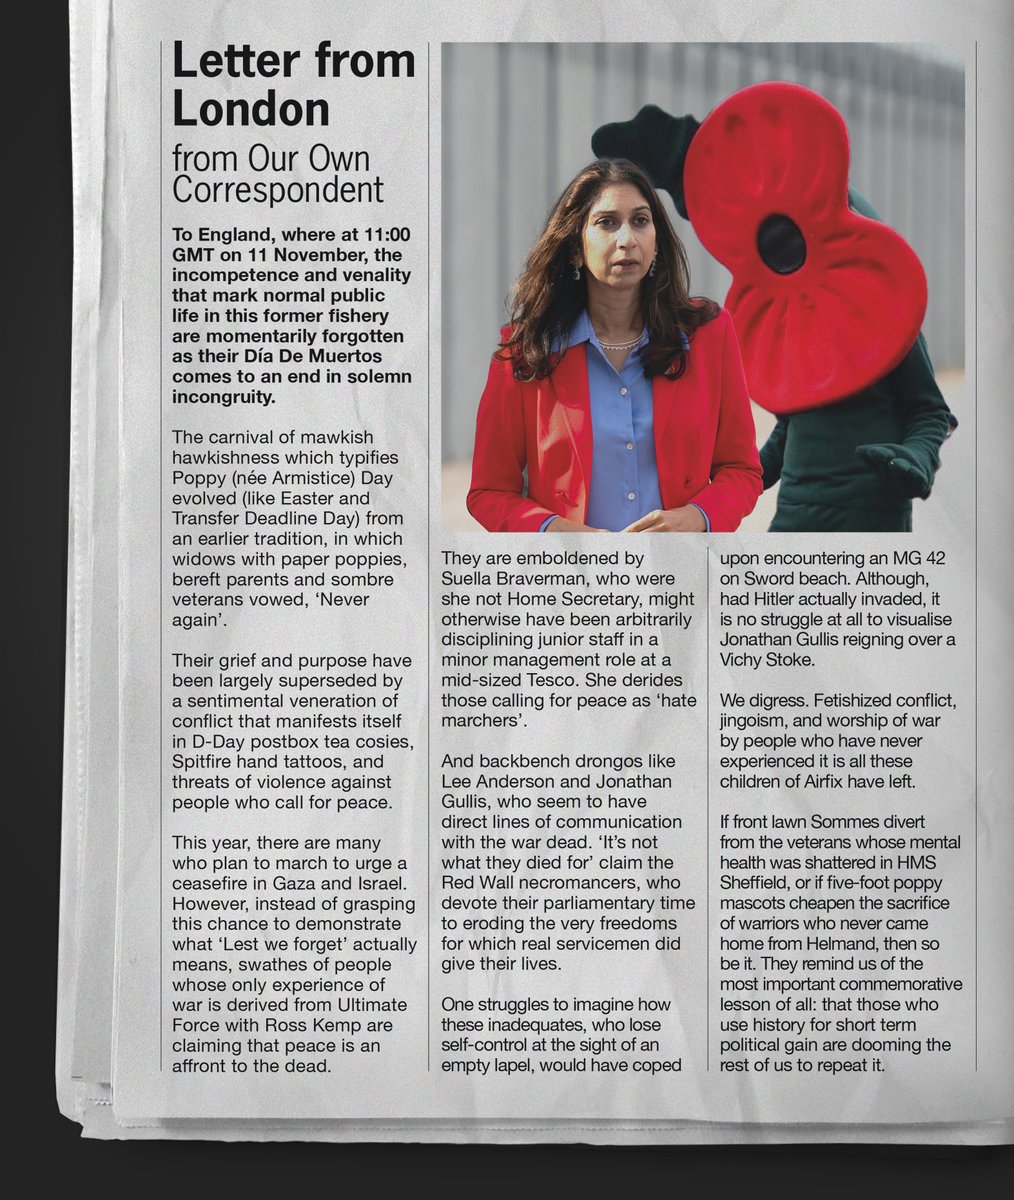 NEW: The Papua New Guinea Courier's UK correspondent reflects on the significance of Poppy Day.